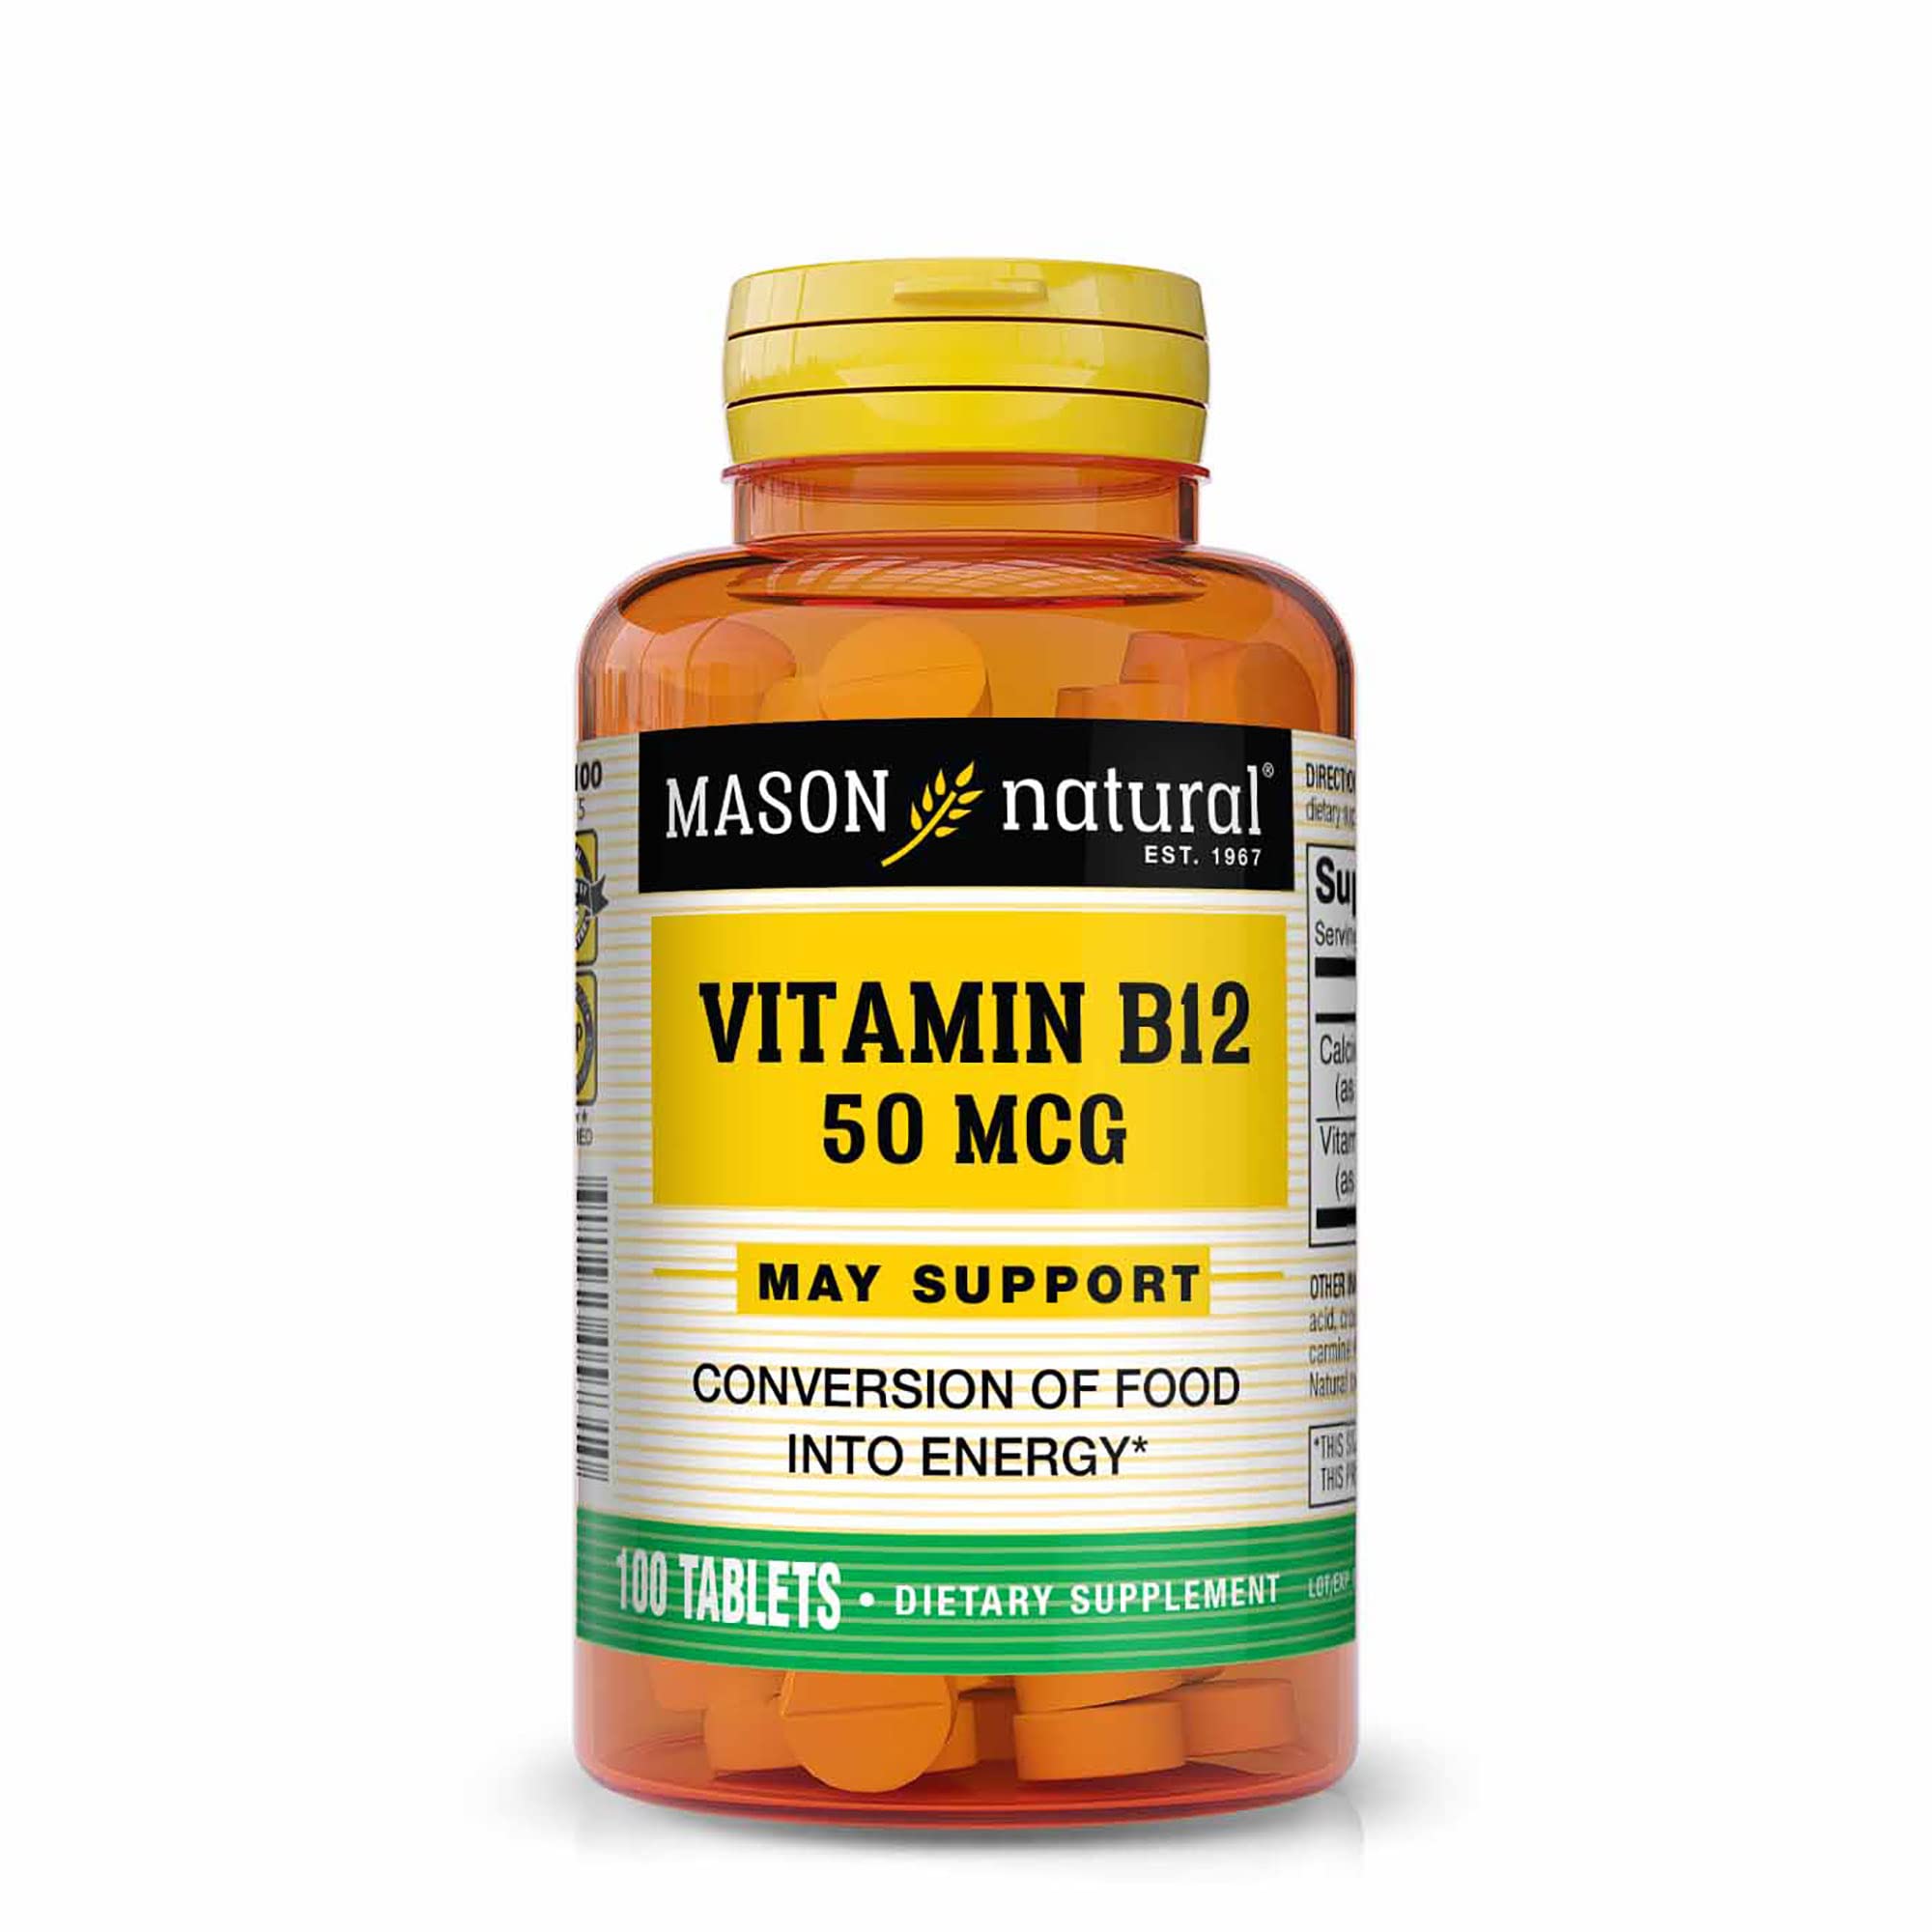 MASON NATURAL Vitamin B12 50 mcg with Calcium - Healthy Conversion of Food into Energy, Supports Nerve Function and Health, 100 Tablets